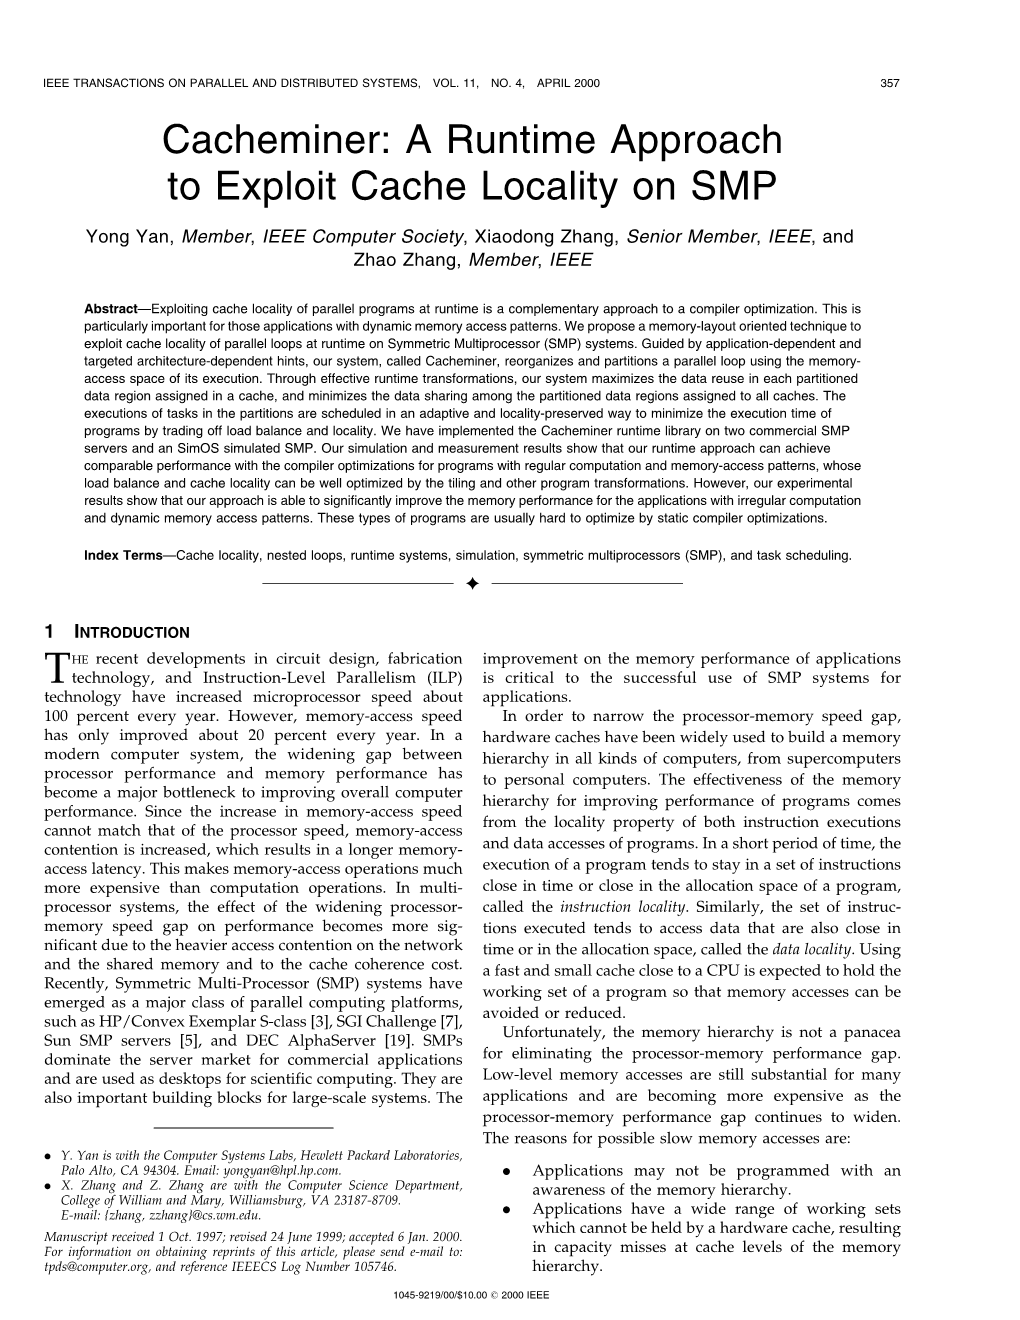 Cacheminer: a Runtime Approach to Exploit Cache Locality on SMP